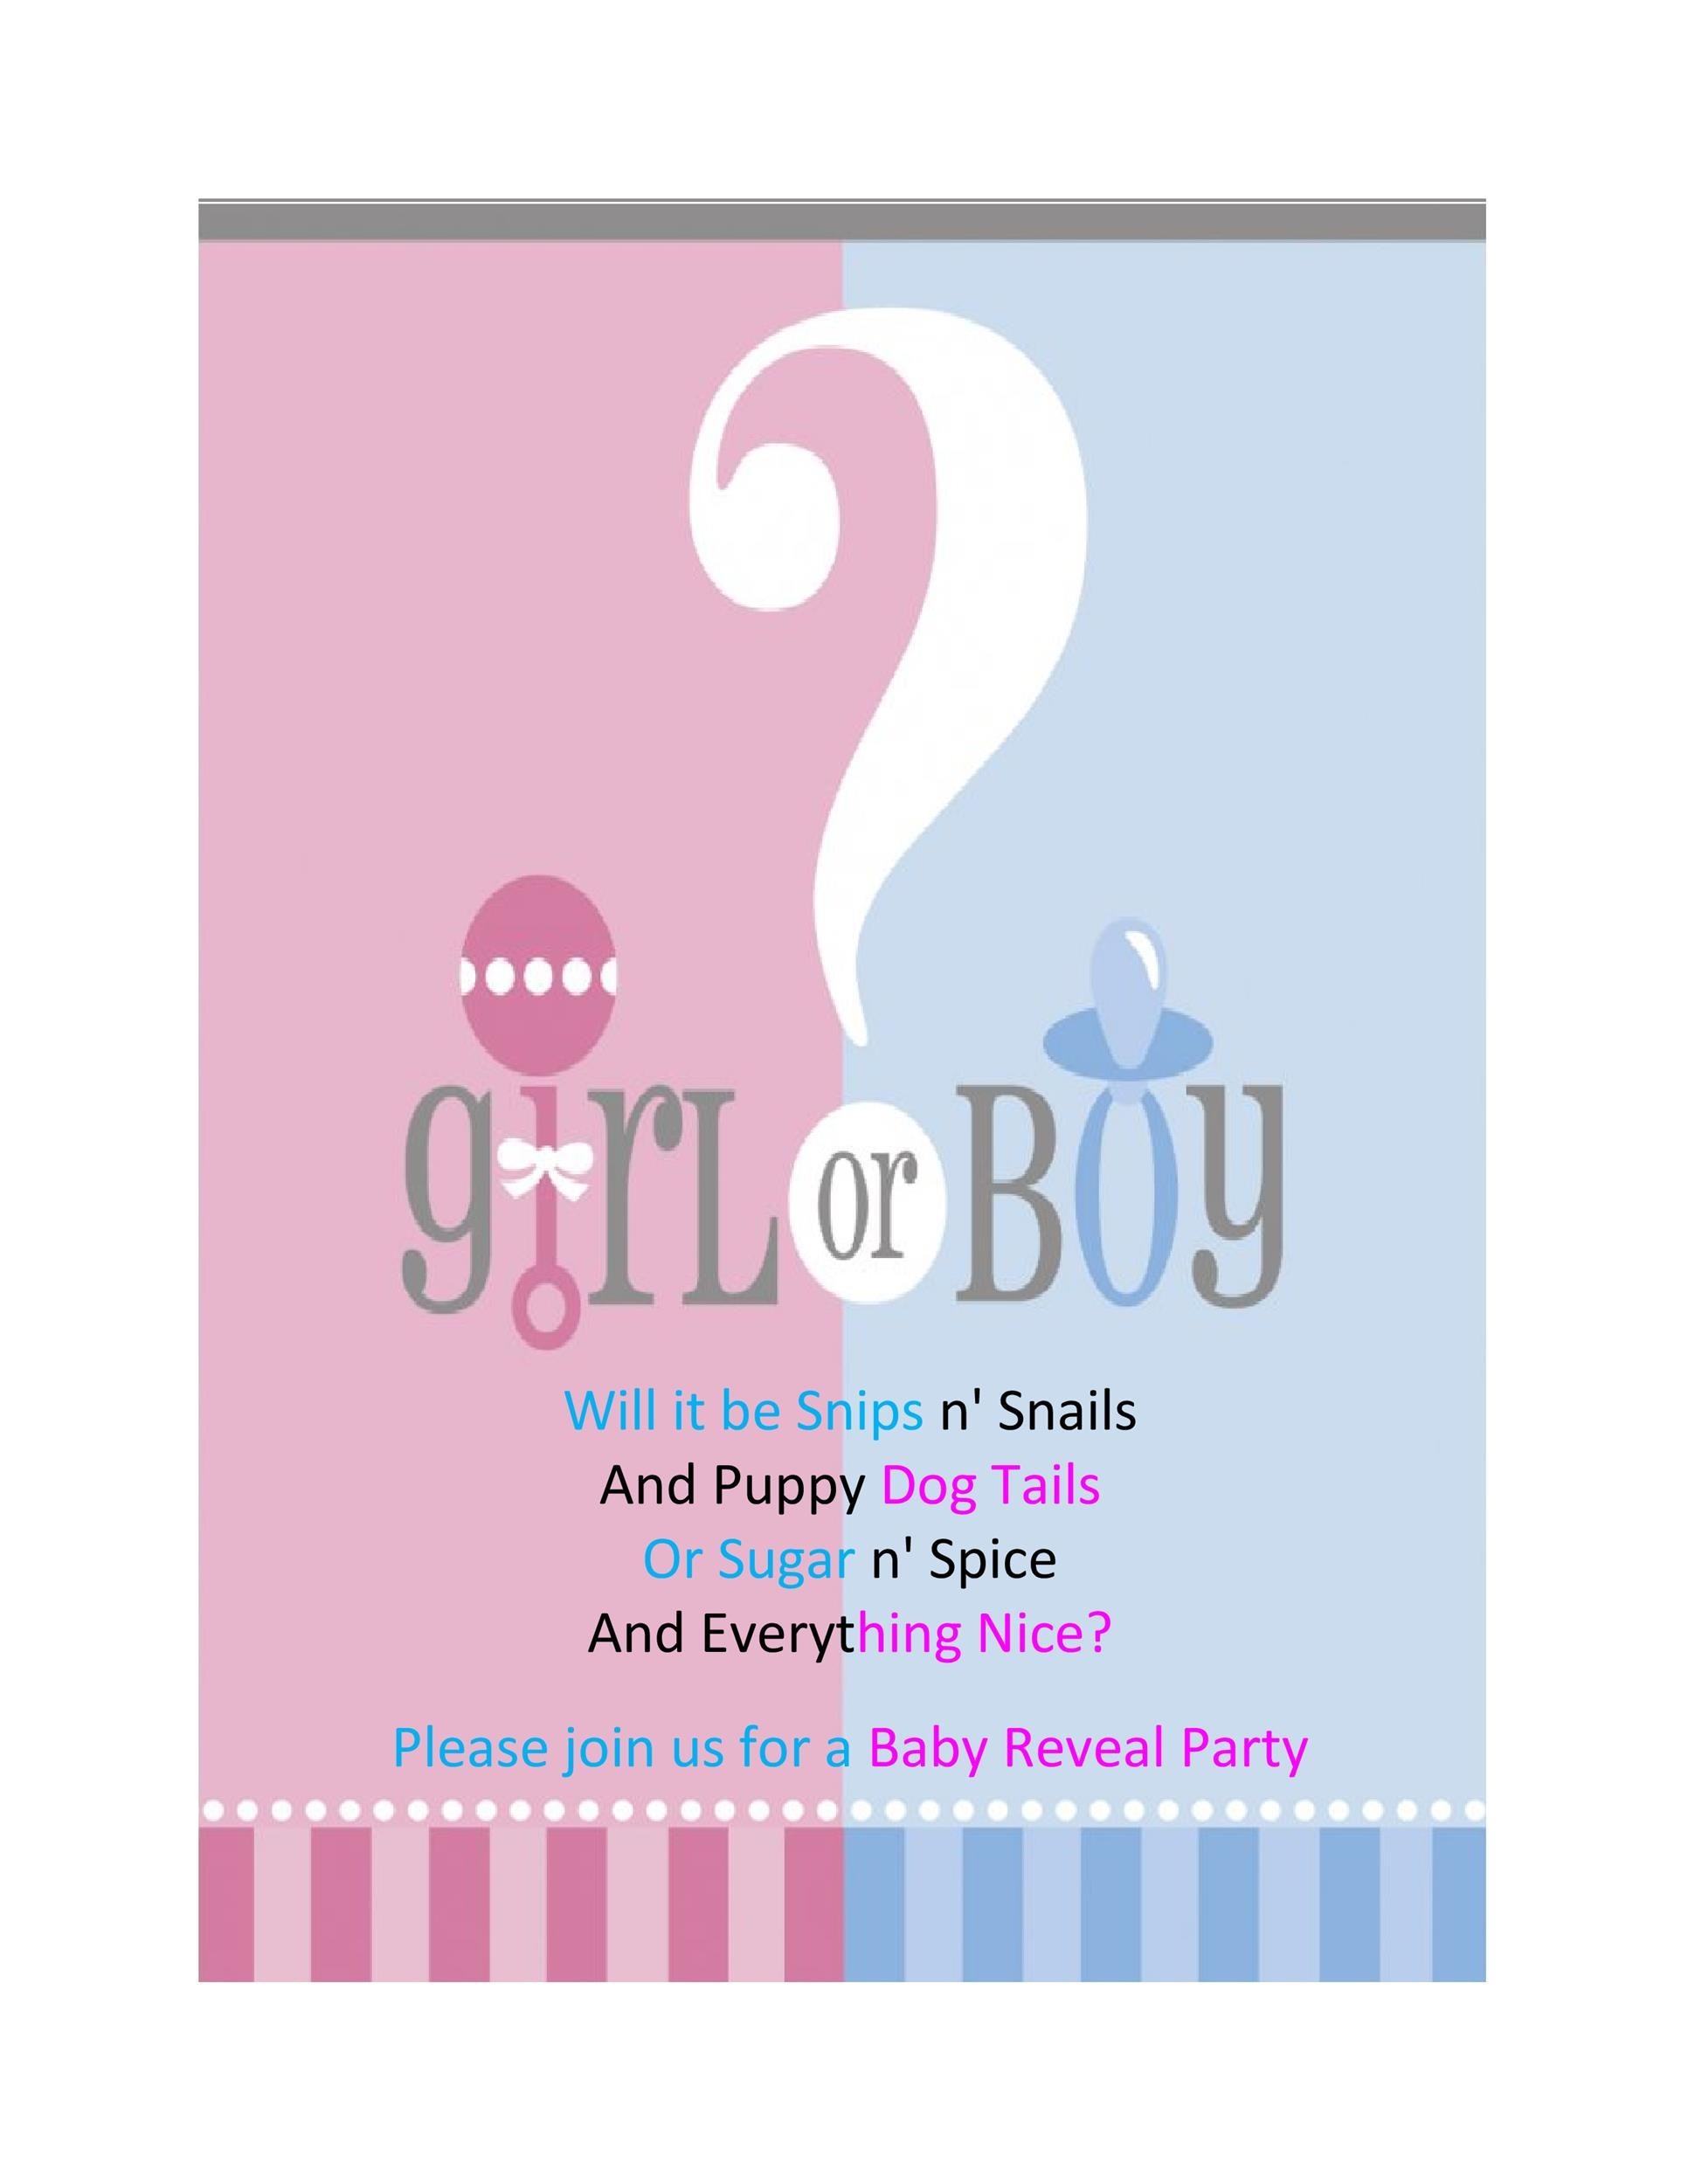 instant-download-gender-reveal-invitation-by-inkobsessiondesigns